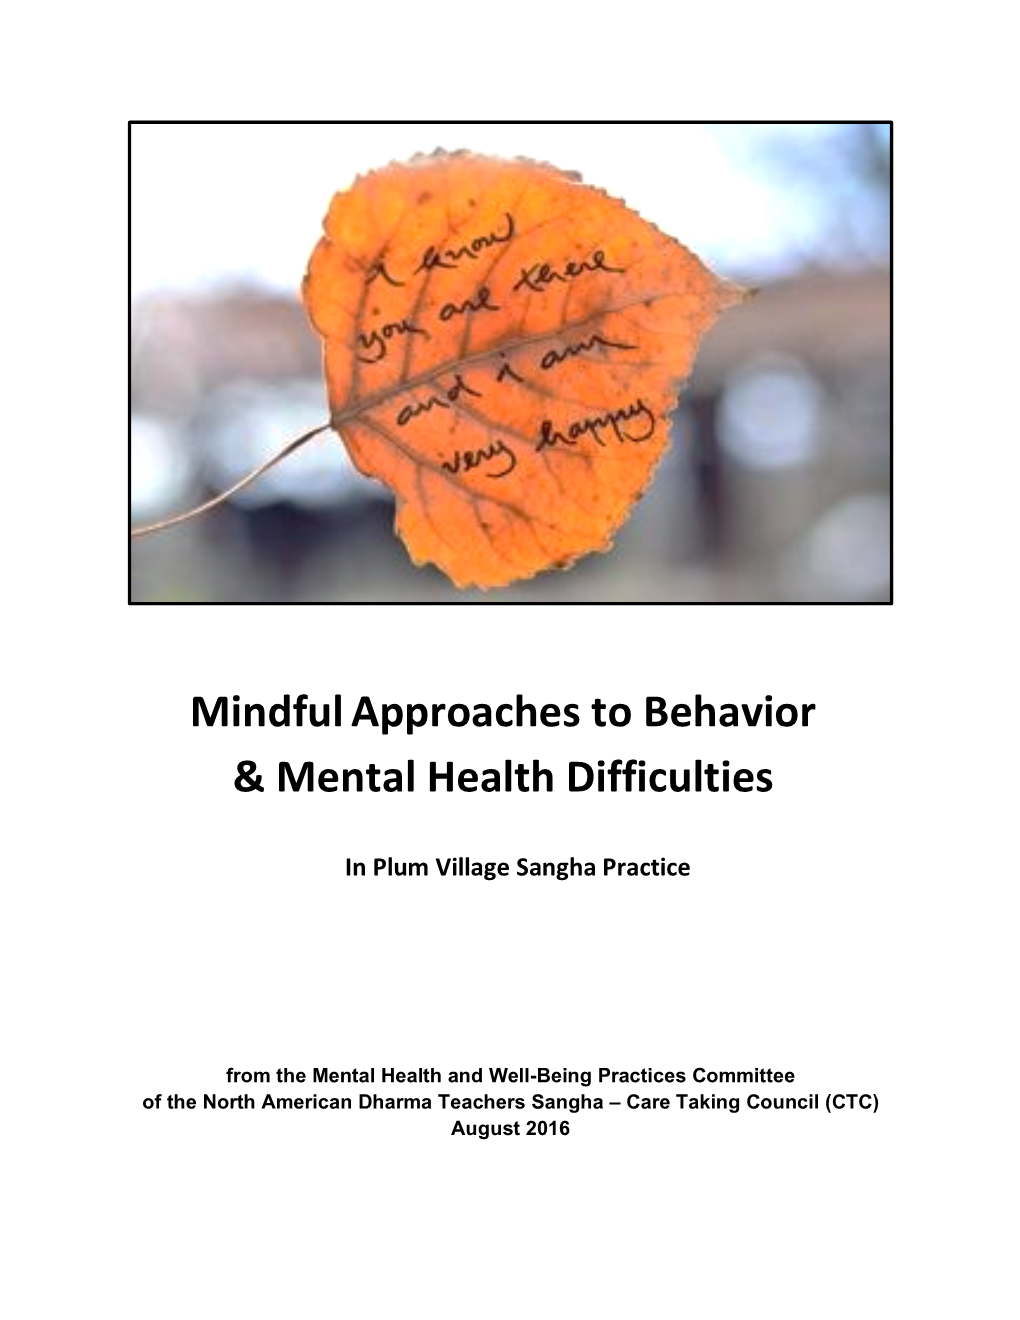 Mindfulapproaches to Behavior & Mental Health Difficulties